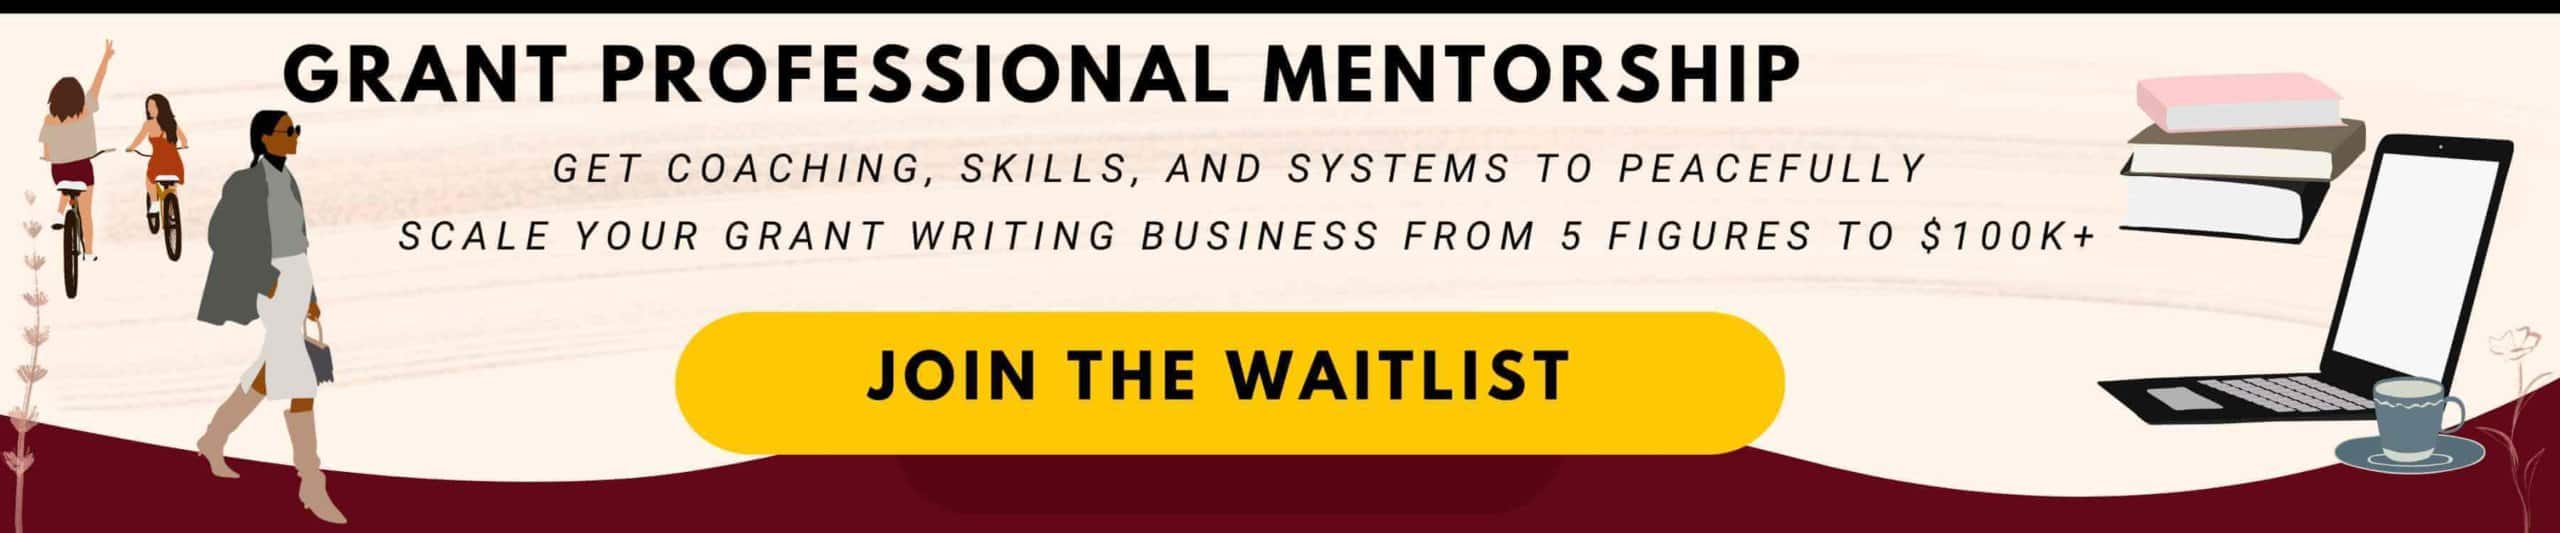 waitlist for mentorship grant writers